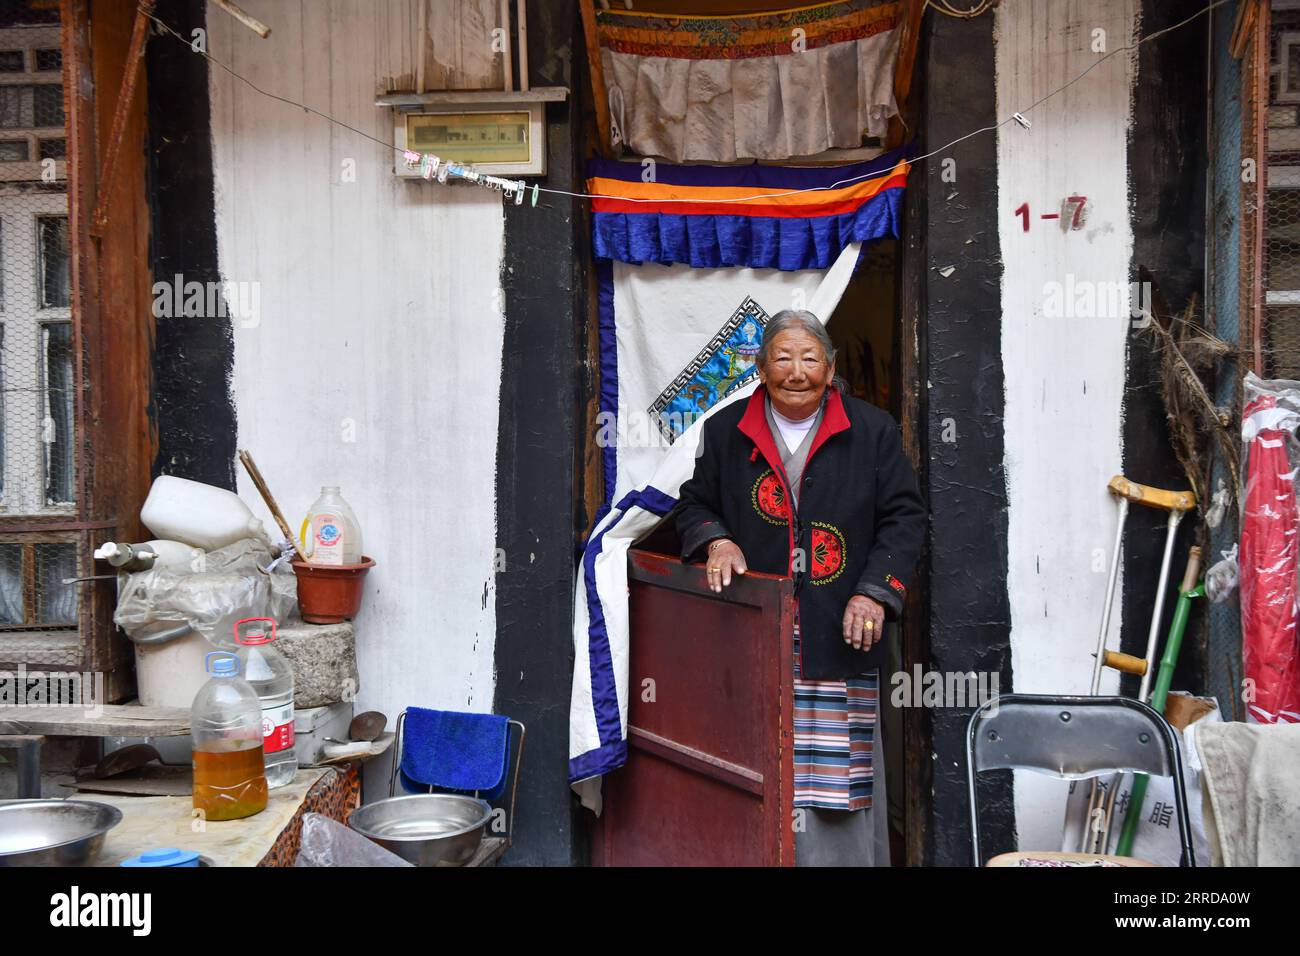 211213 -- LHASA, Dec. 13, 2021 -- Migmar Tsamjo is seen at her house in Lhasa, southwest China s Tibet Autonomous Region, Dec. 7, 2021. Migmar Tsamjo was born in 1933. She herded cattle for the serf owner and lived a miserable life in childhood. She fled from the serf owner in 1955, and was later rescued by the People s Liberation Army. She then was sent to Chengdu in southwest China s Sichuan Province and began to study at a college. In 1959, democratic reform was launched and feudal serfdom was finally abolished in Tibet. A million serfs and slaves were emancipated. Recalling bitter days of Stock Photo